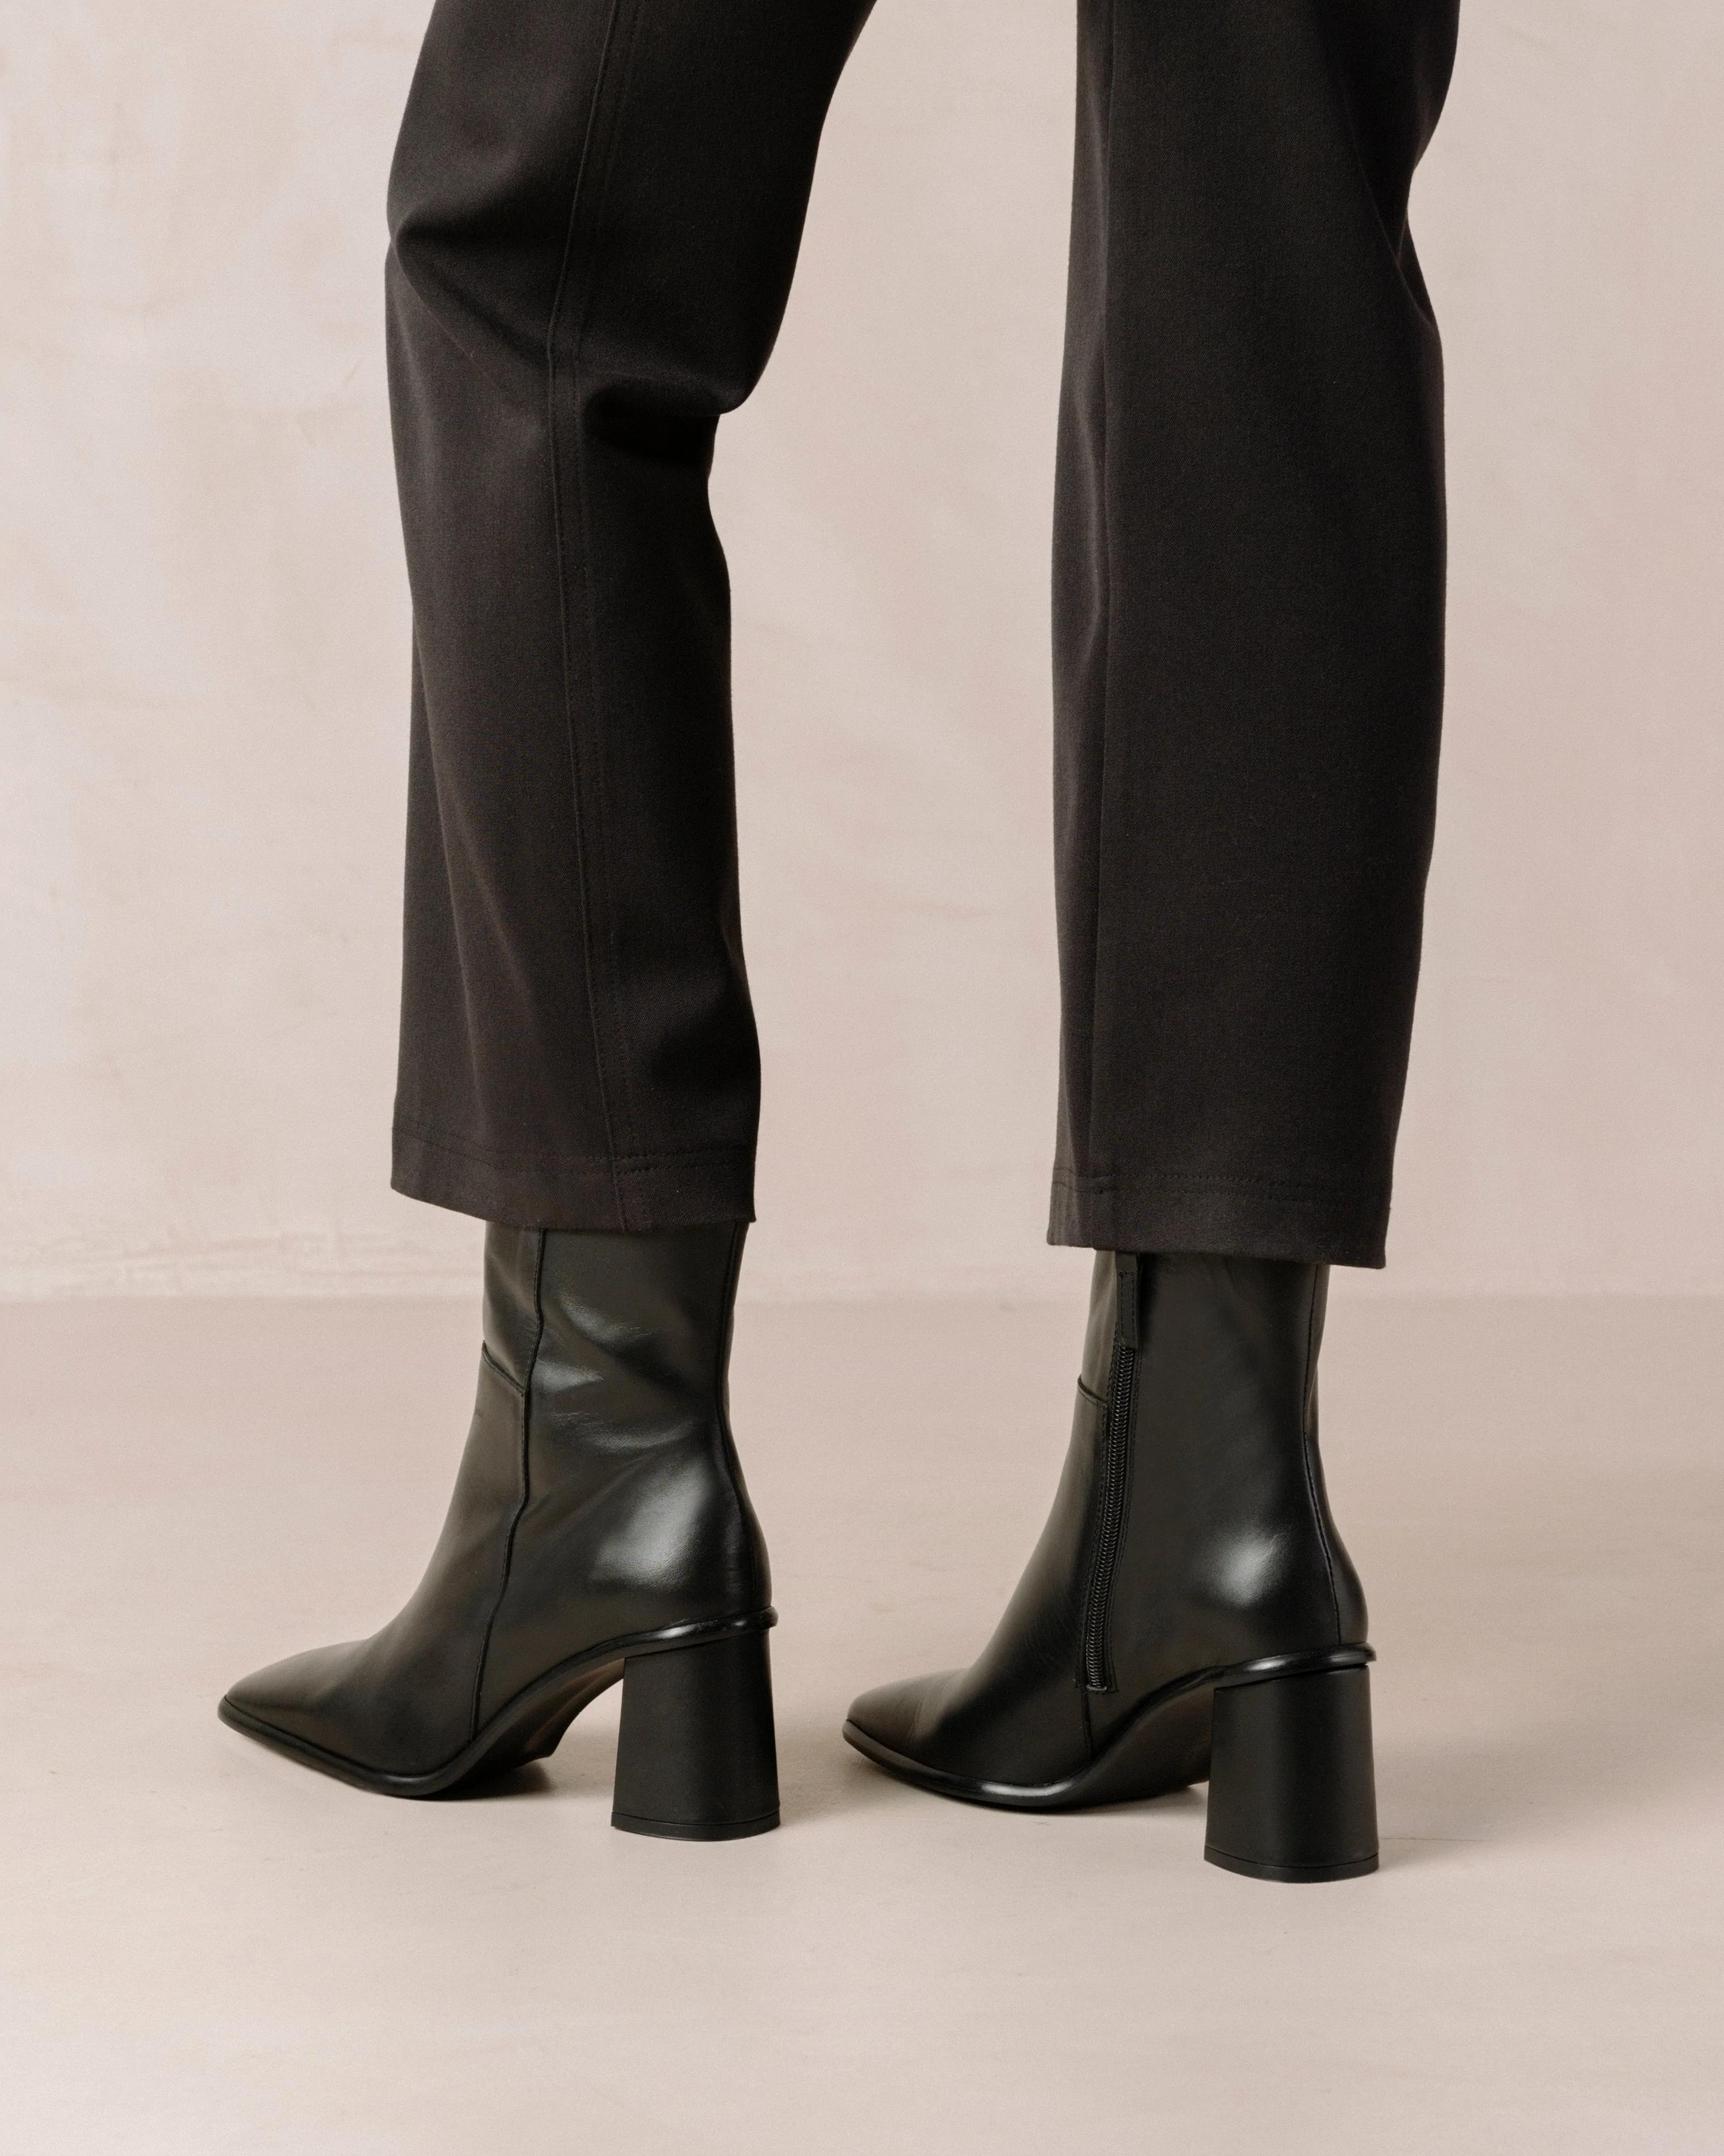 Product Image for West Total Leather Boots, Black